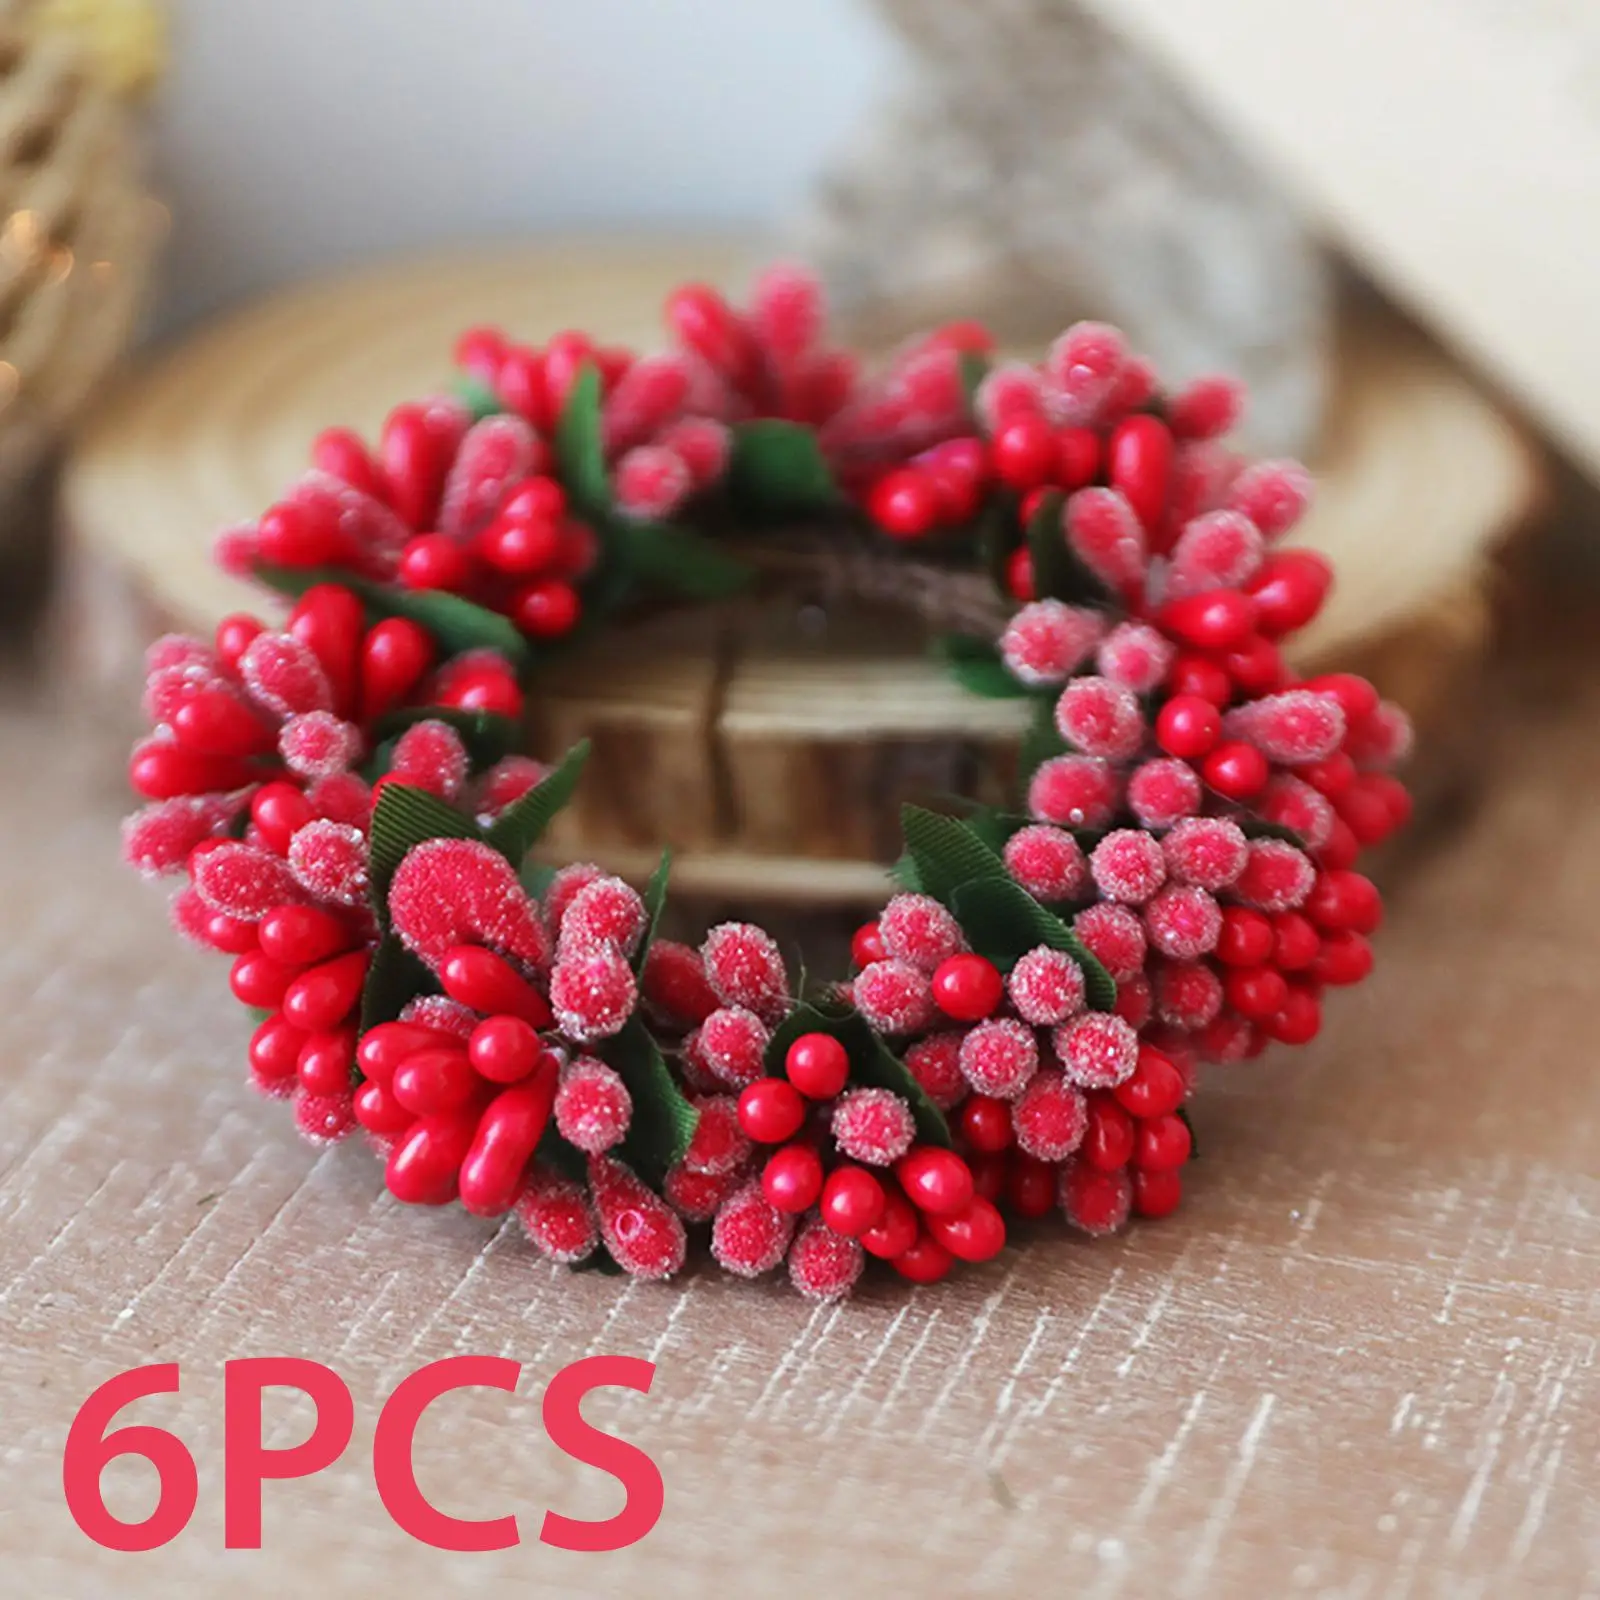 6Pcs Red Berries Candle Ring Wreath Greenery Wreath Pillar Candleholder for Living Room Easter Table Thanksgiving Decorations